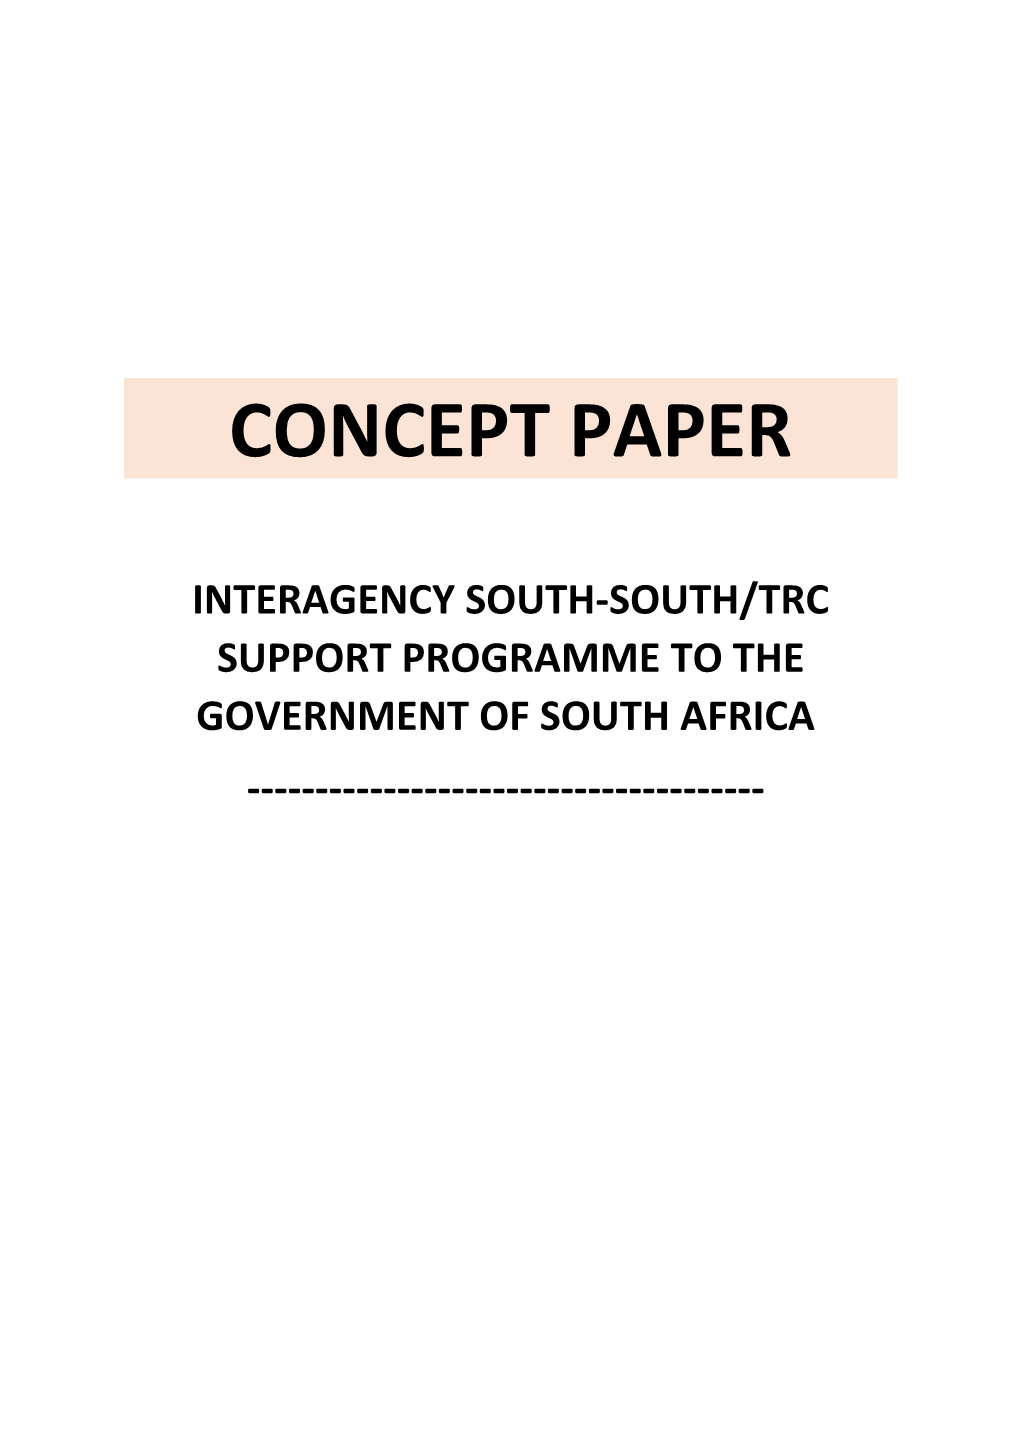 Interagency South-South/Trc Support Programme to the Government of South Africa